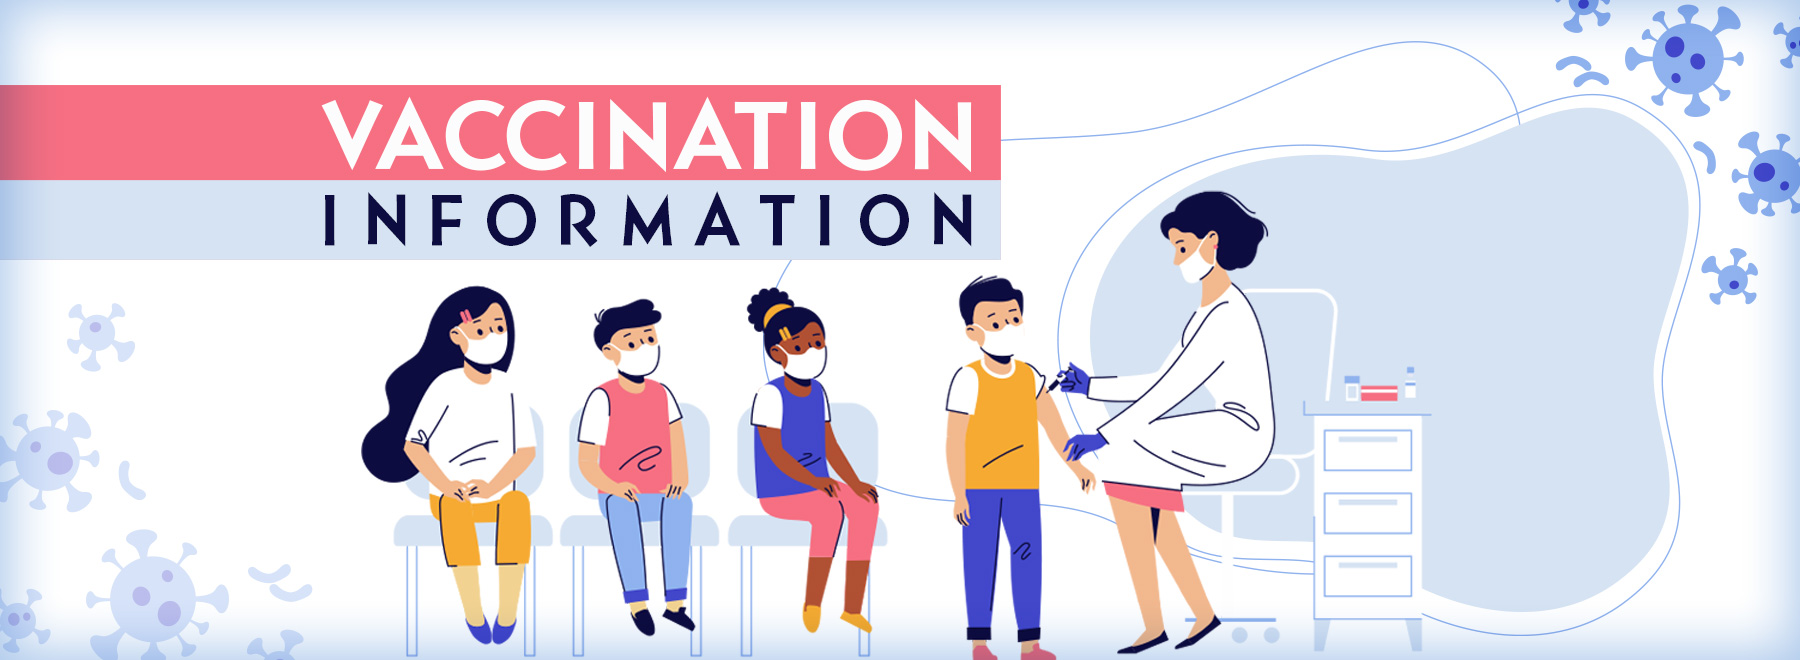 Illustration of diverse group of kids getting a vaccination